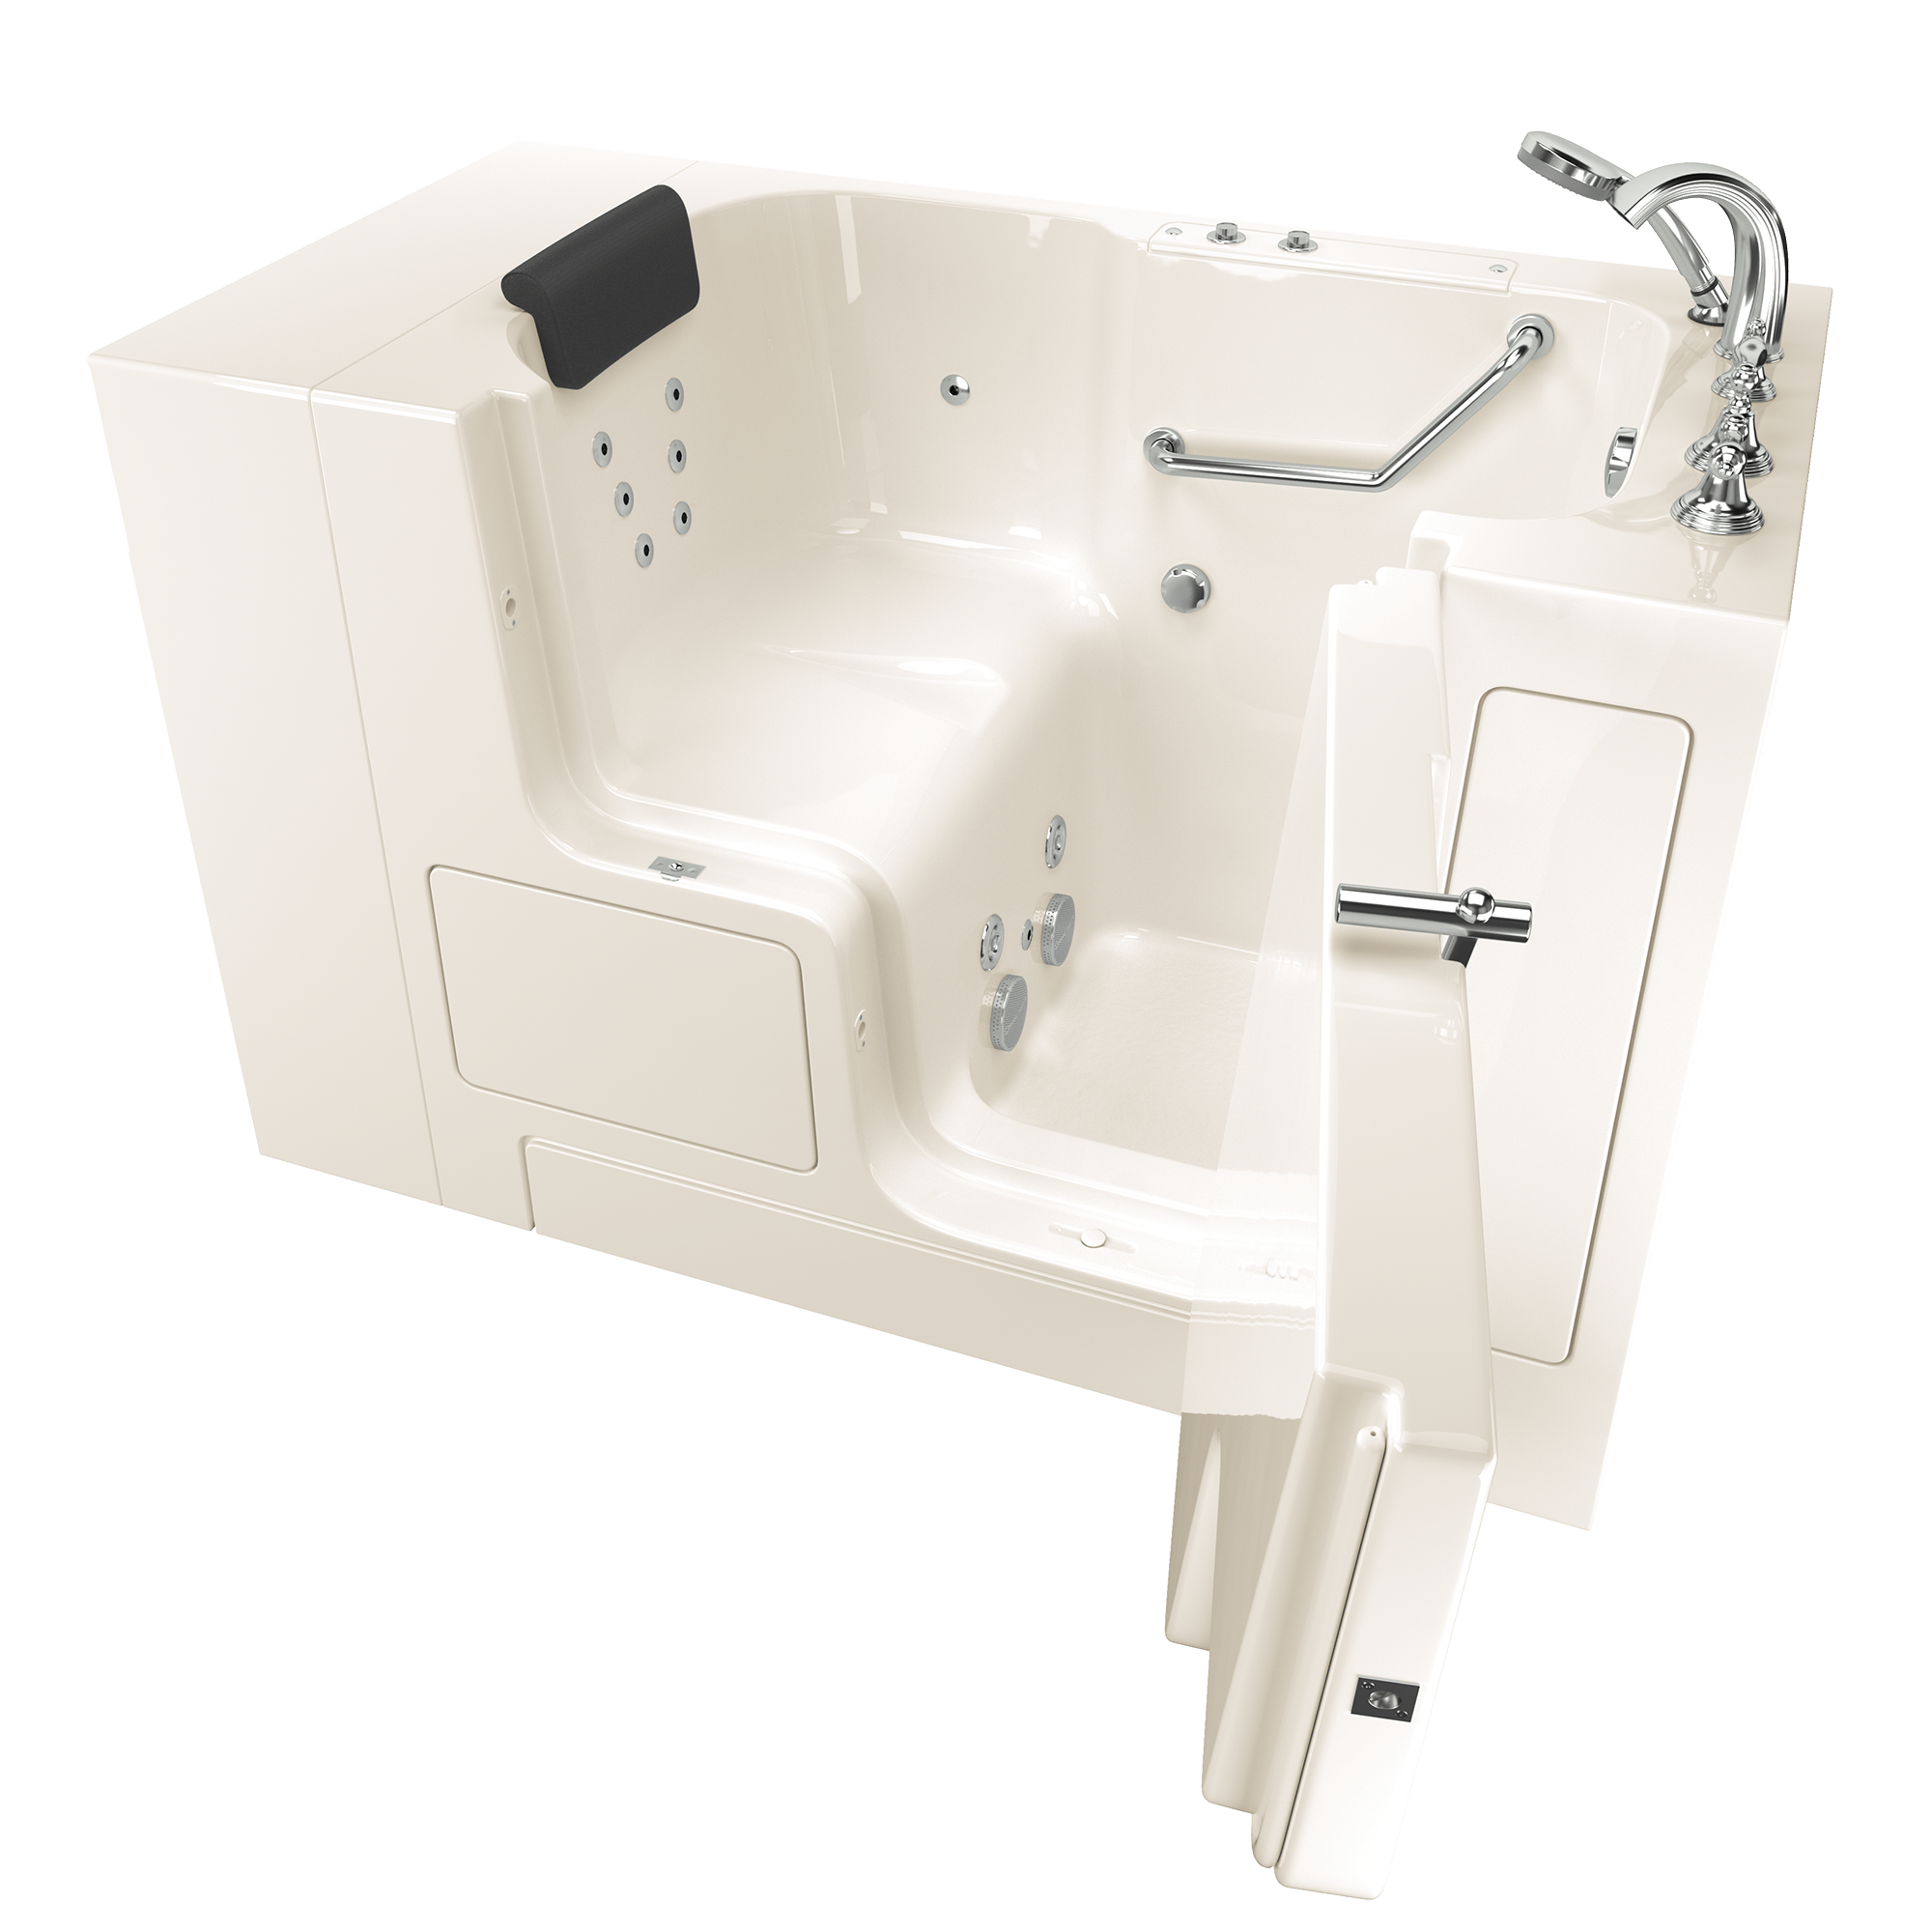 Gelcoat Premium Series 32 x 52 -Inch Walk-in Tub With Whirlpool System - Right-Hand Drain With Faucet